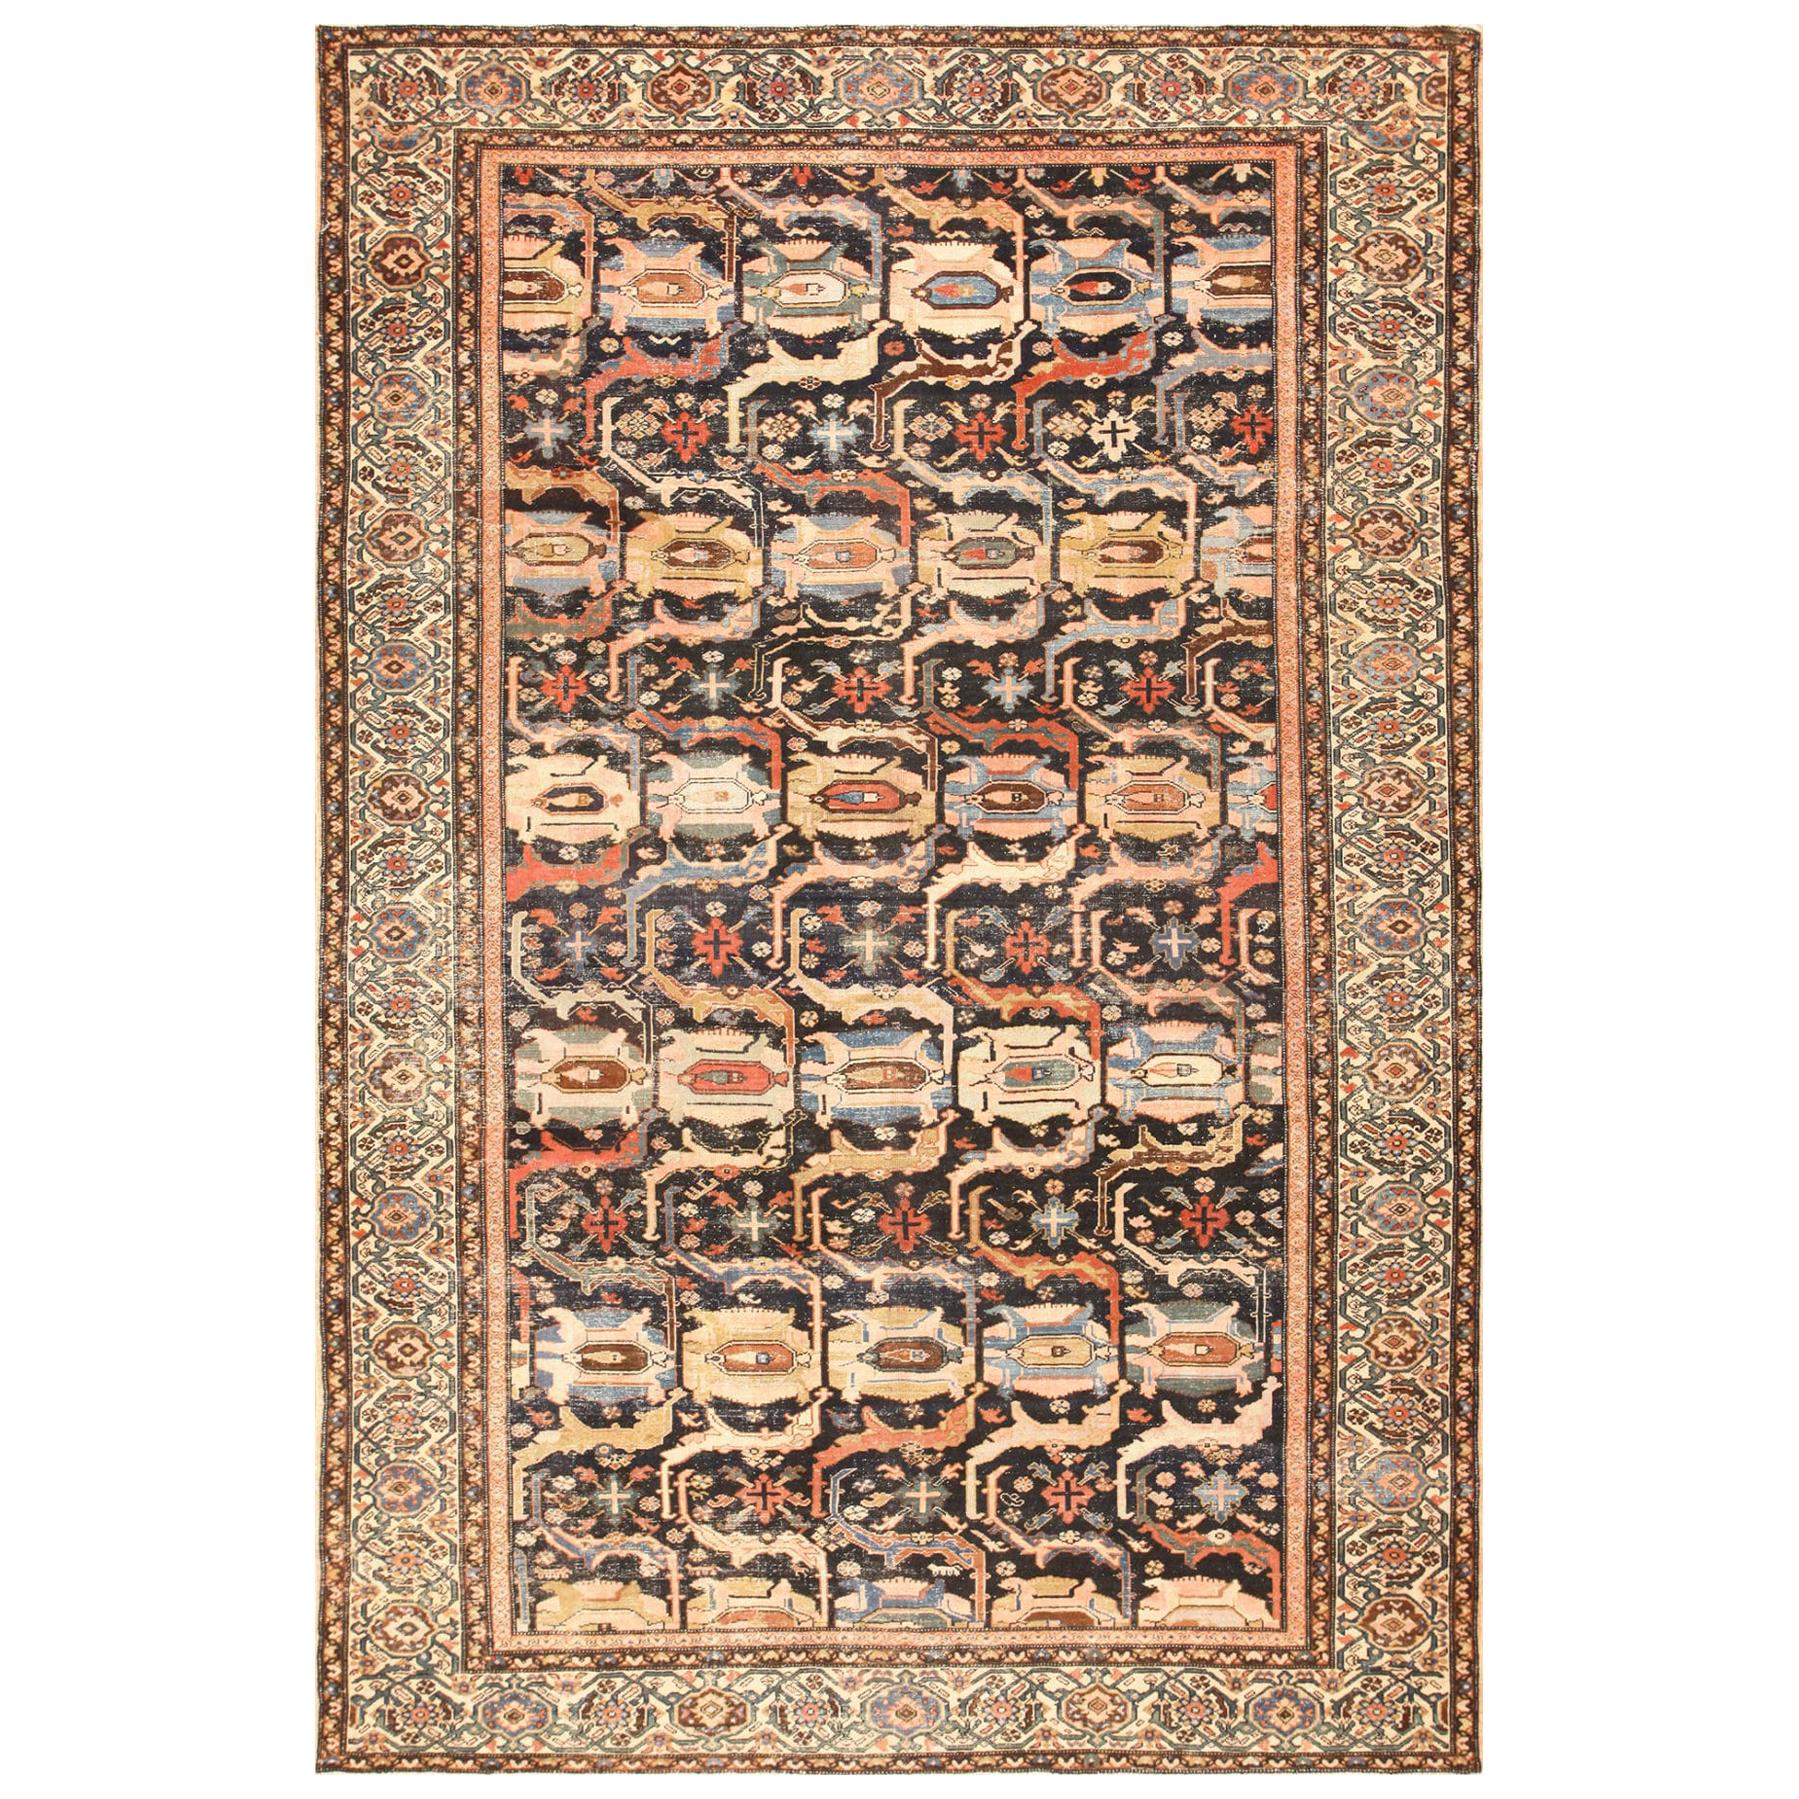 Antique Shabby Chic Persian Malayer Rug. Size: 8 ft 6 in x 12 ft 9 in For Sale